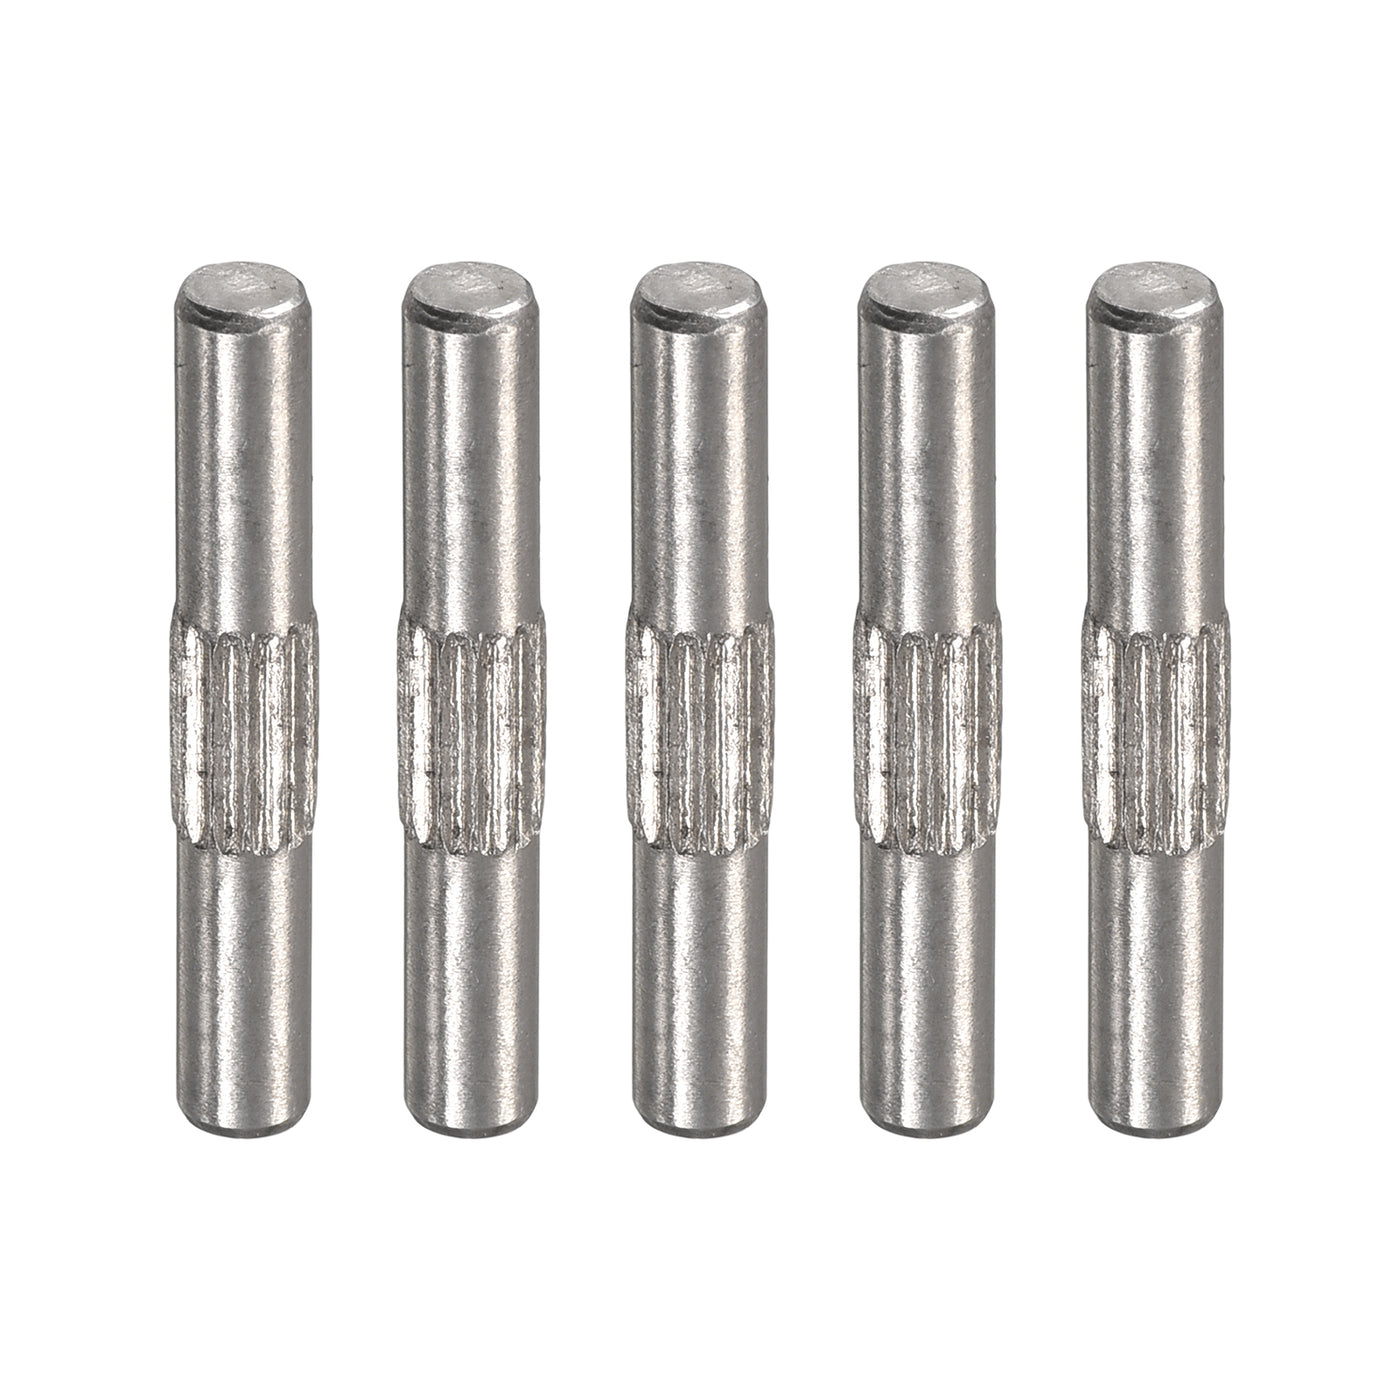 uxcell Uxcell 3x20mm 304 Stainless Steel Dowel Pins, 5Pcs Center Knurled Chamfered End Pin